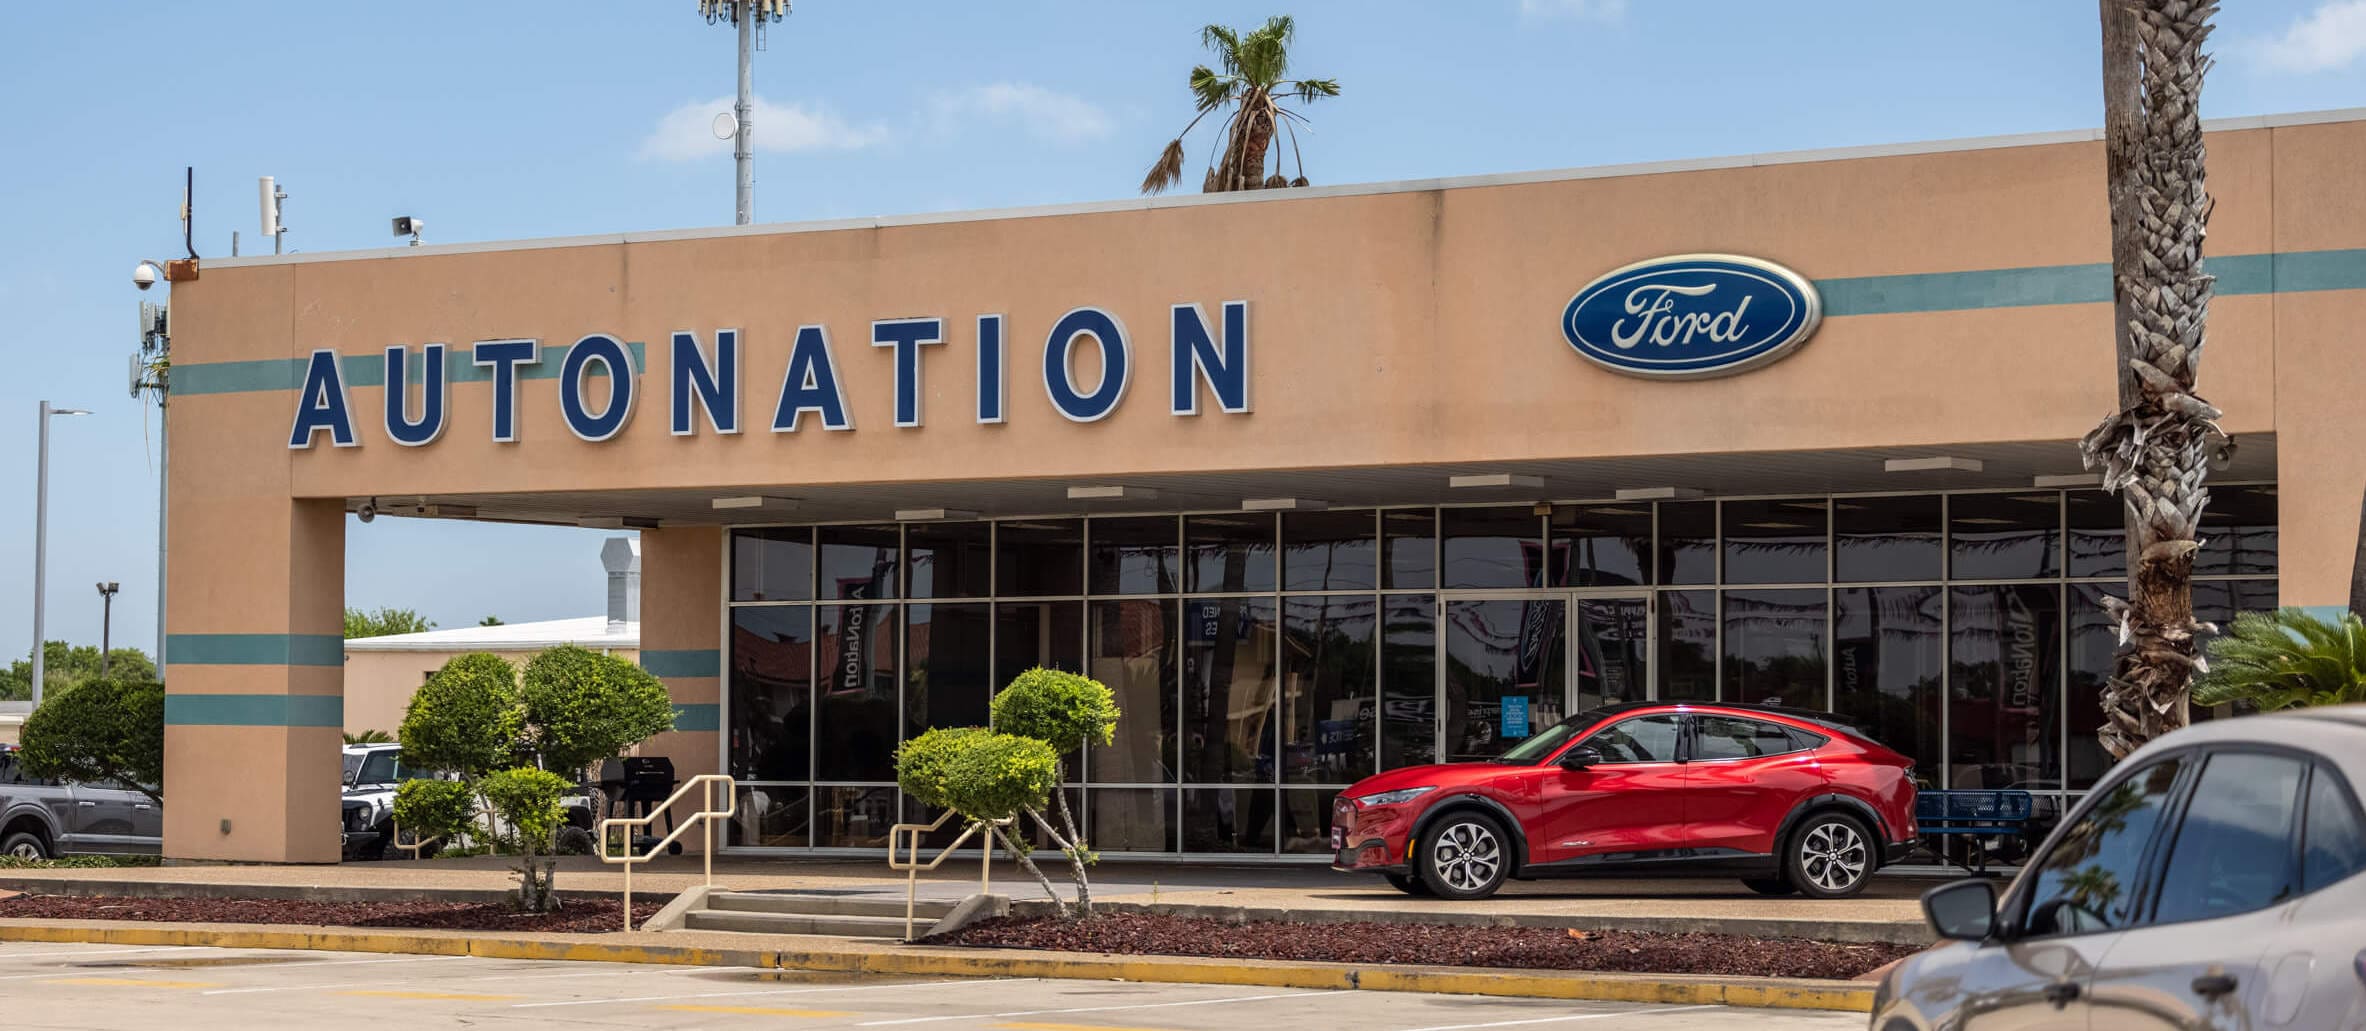 Autonation ford Corpus Christi exterior with red ford mustang parked near entrance